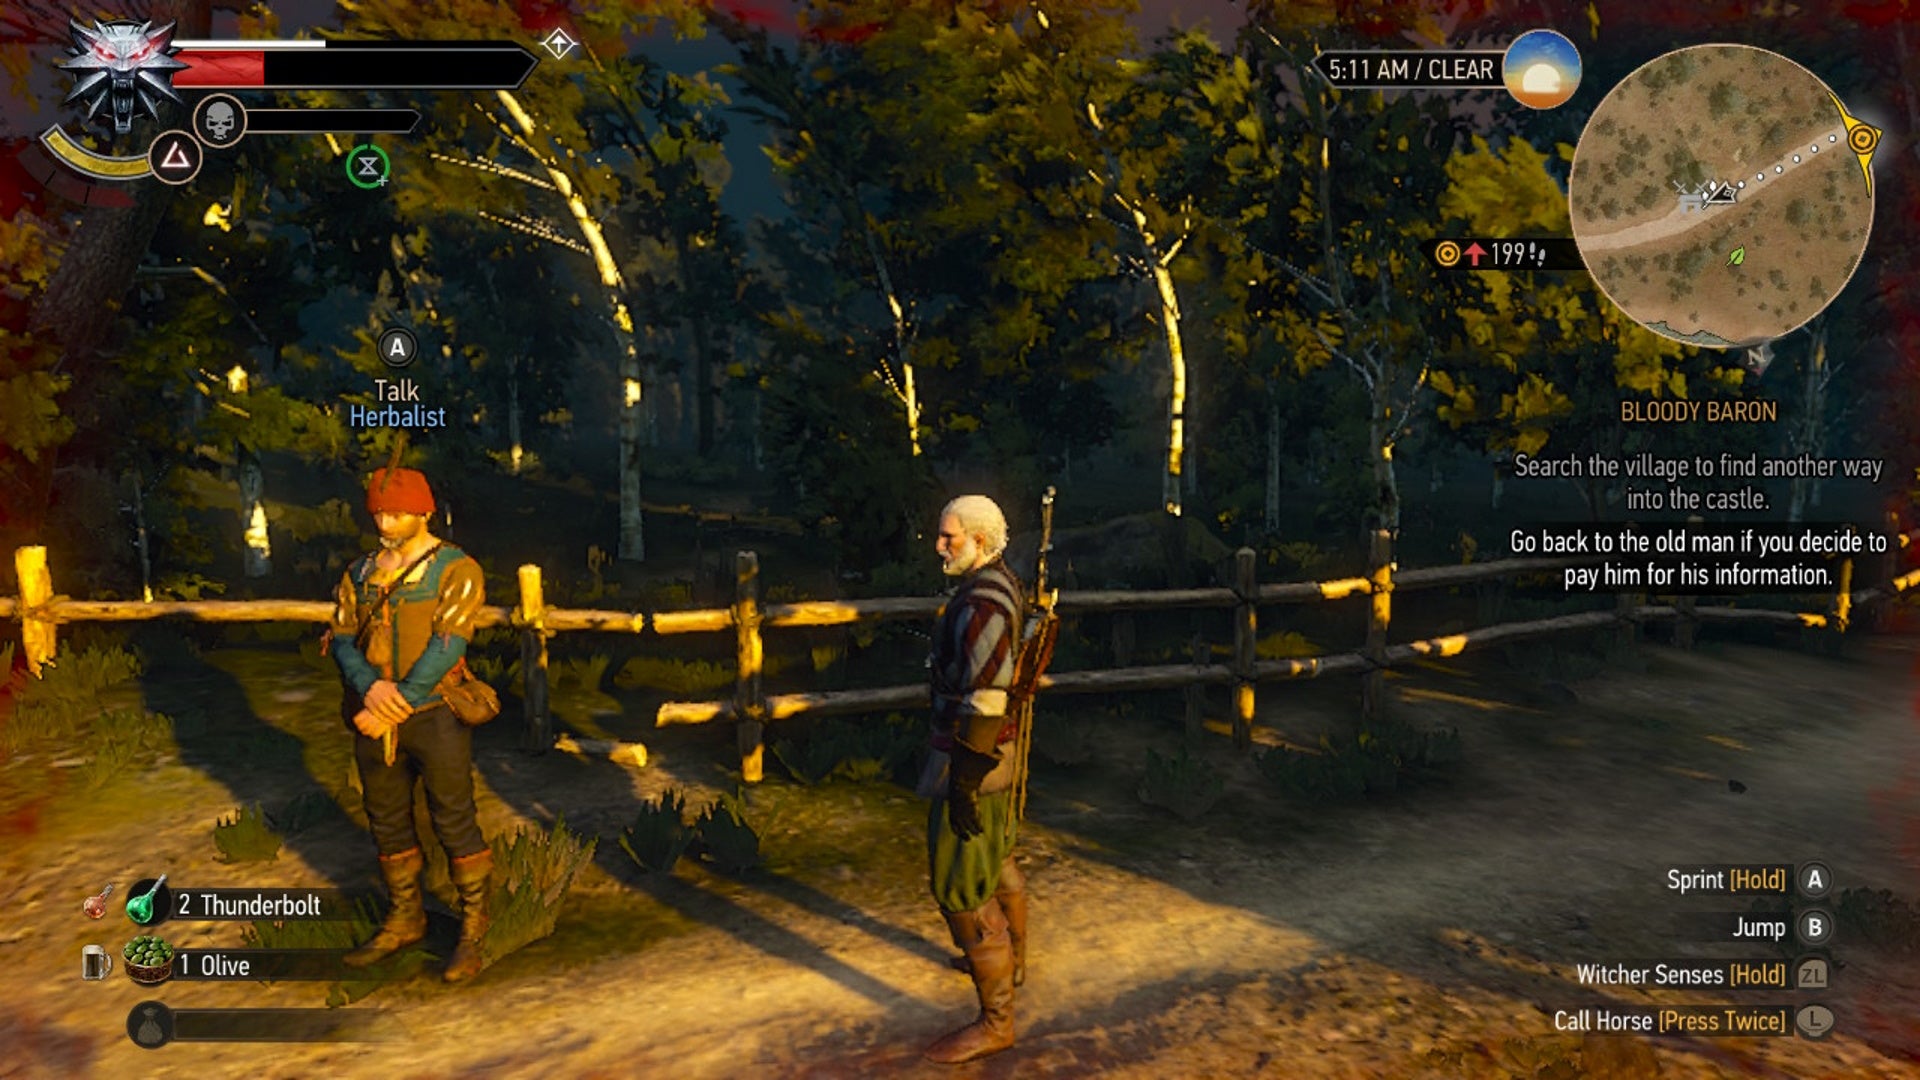 Witcher 3 alchemy: A man in a red and grey striped shirt is standing on a dirt road near a fence, on the edge of a forest. He's looking at a man wearing a red cap